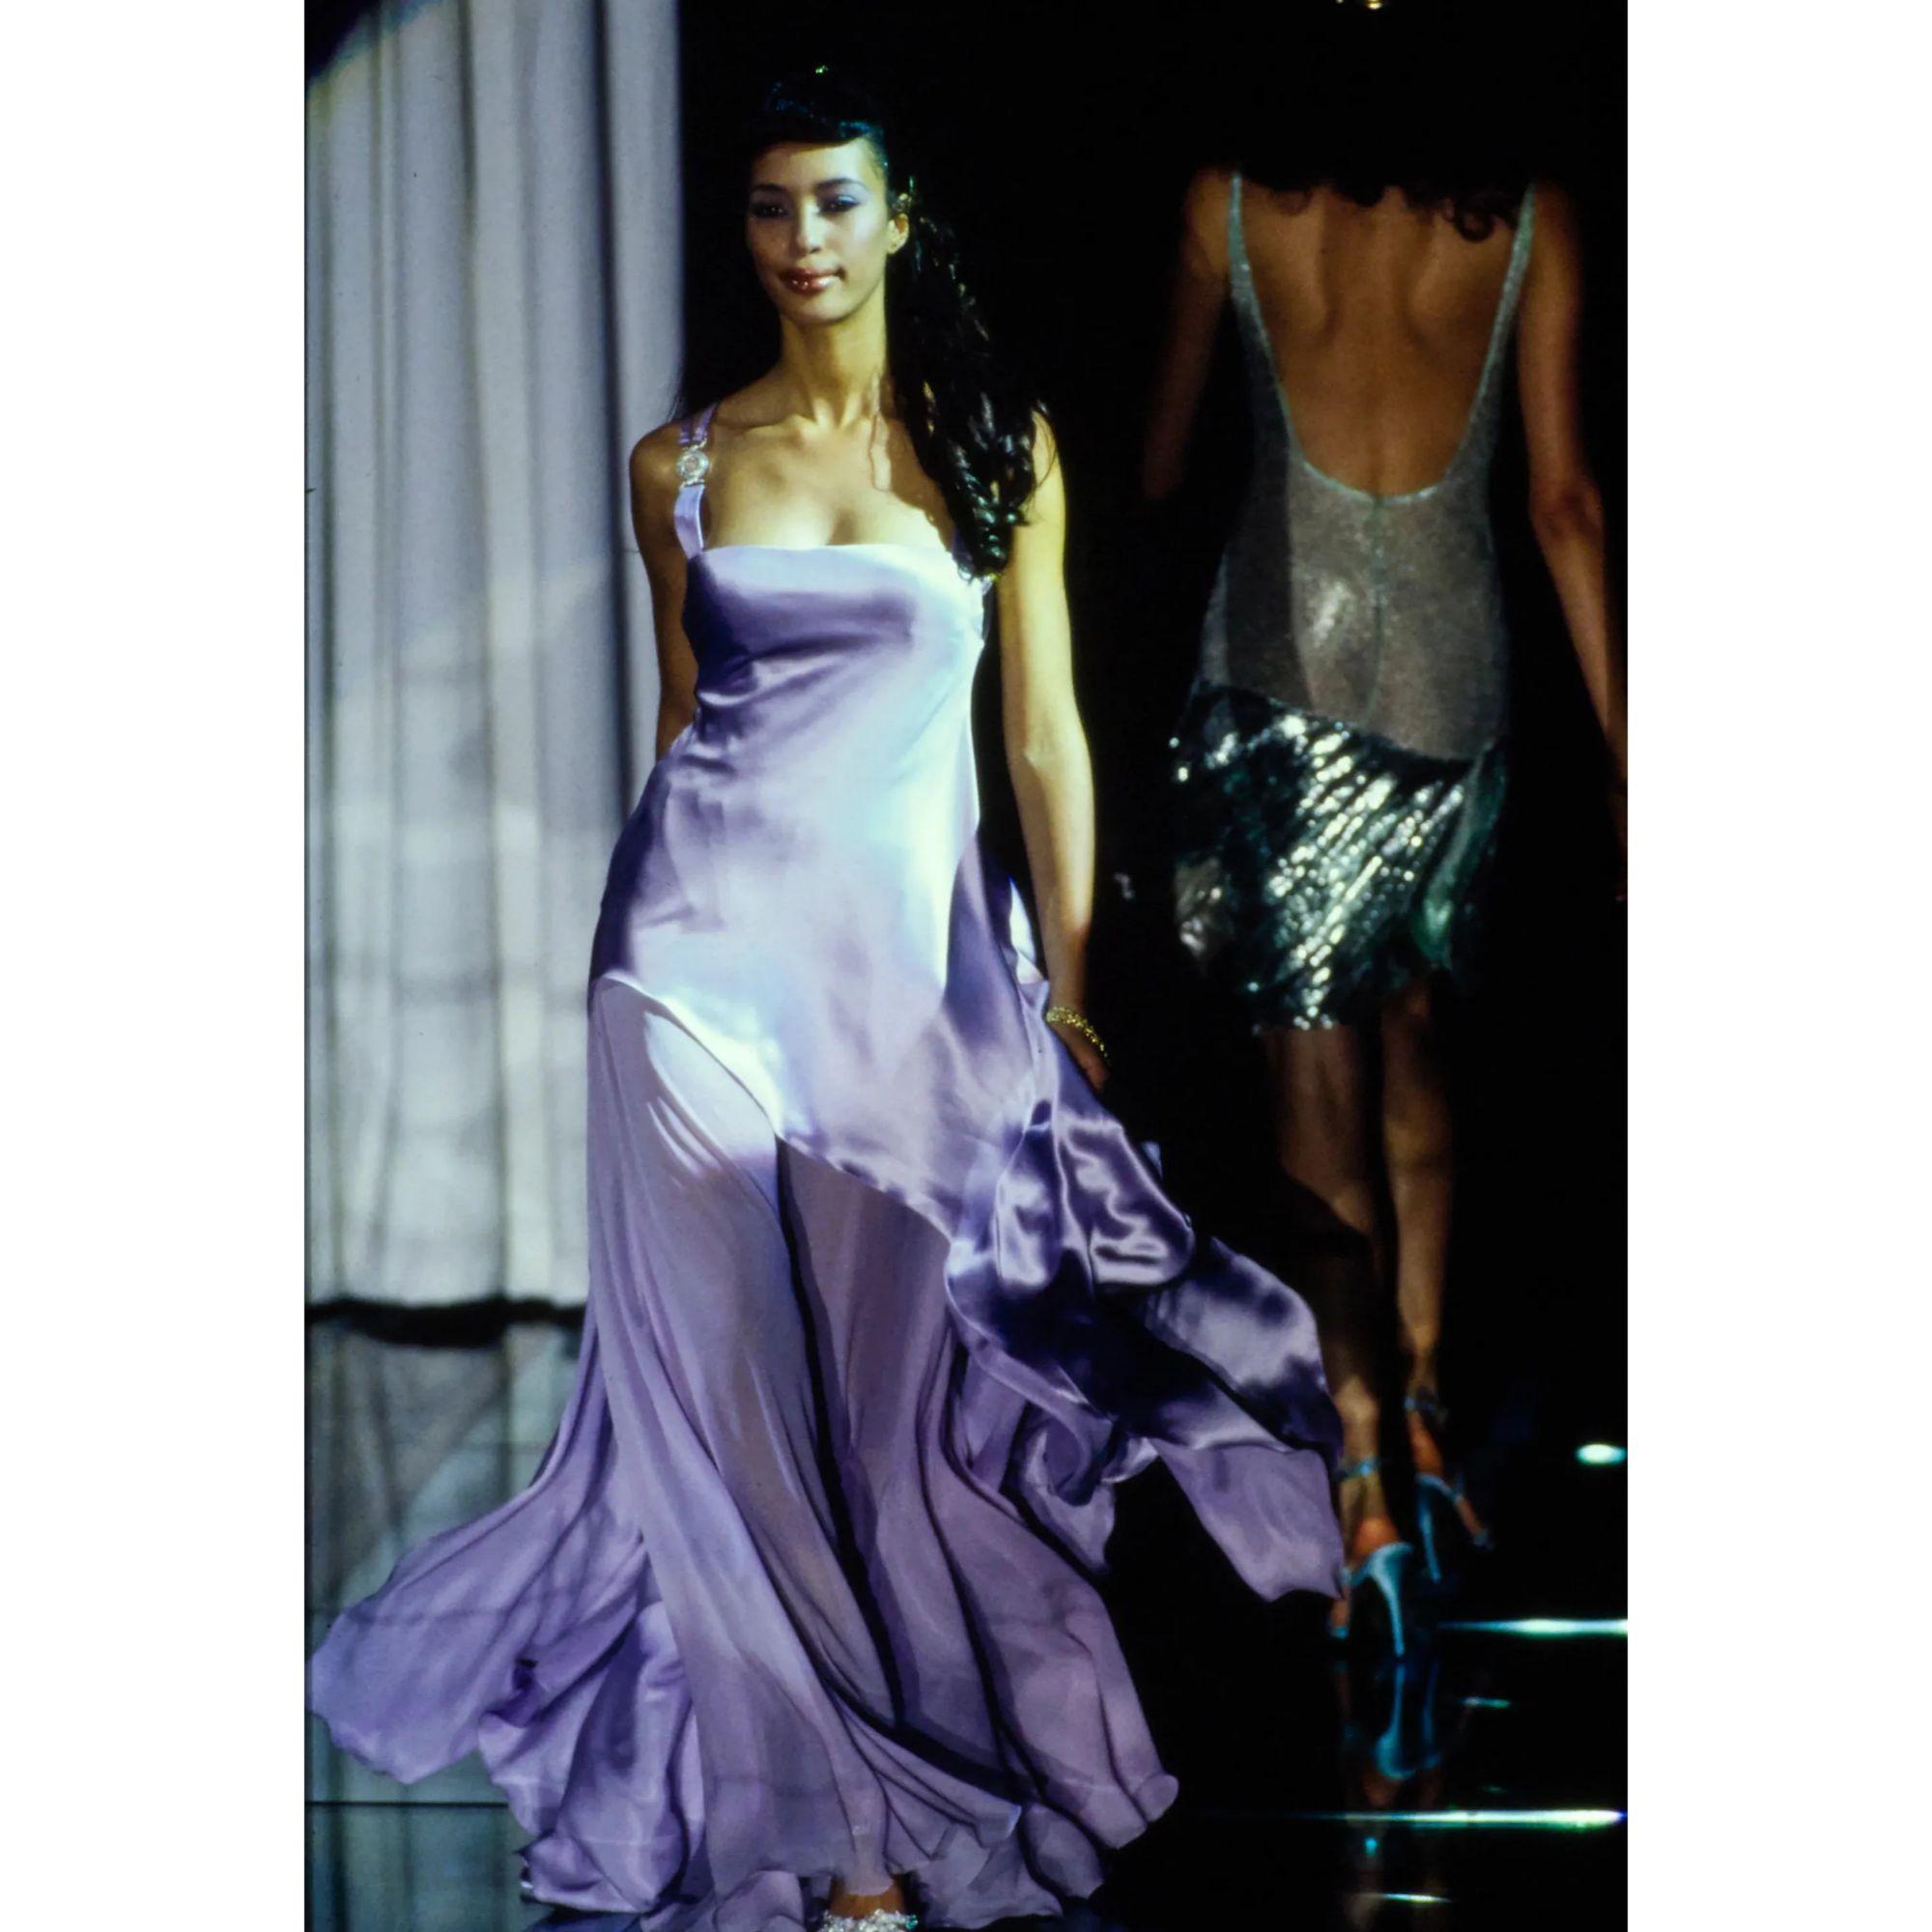 S/S 1995 Gianni Versace lavender purple silk asymmetrical drape gown. Features signature Medusa head racerback straps, built-in corset and side zip closure. Silk satin gown with asymmetrical open silk chiffon flowing hemline. As seen on the runway